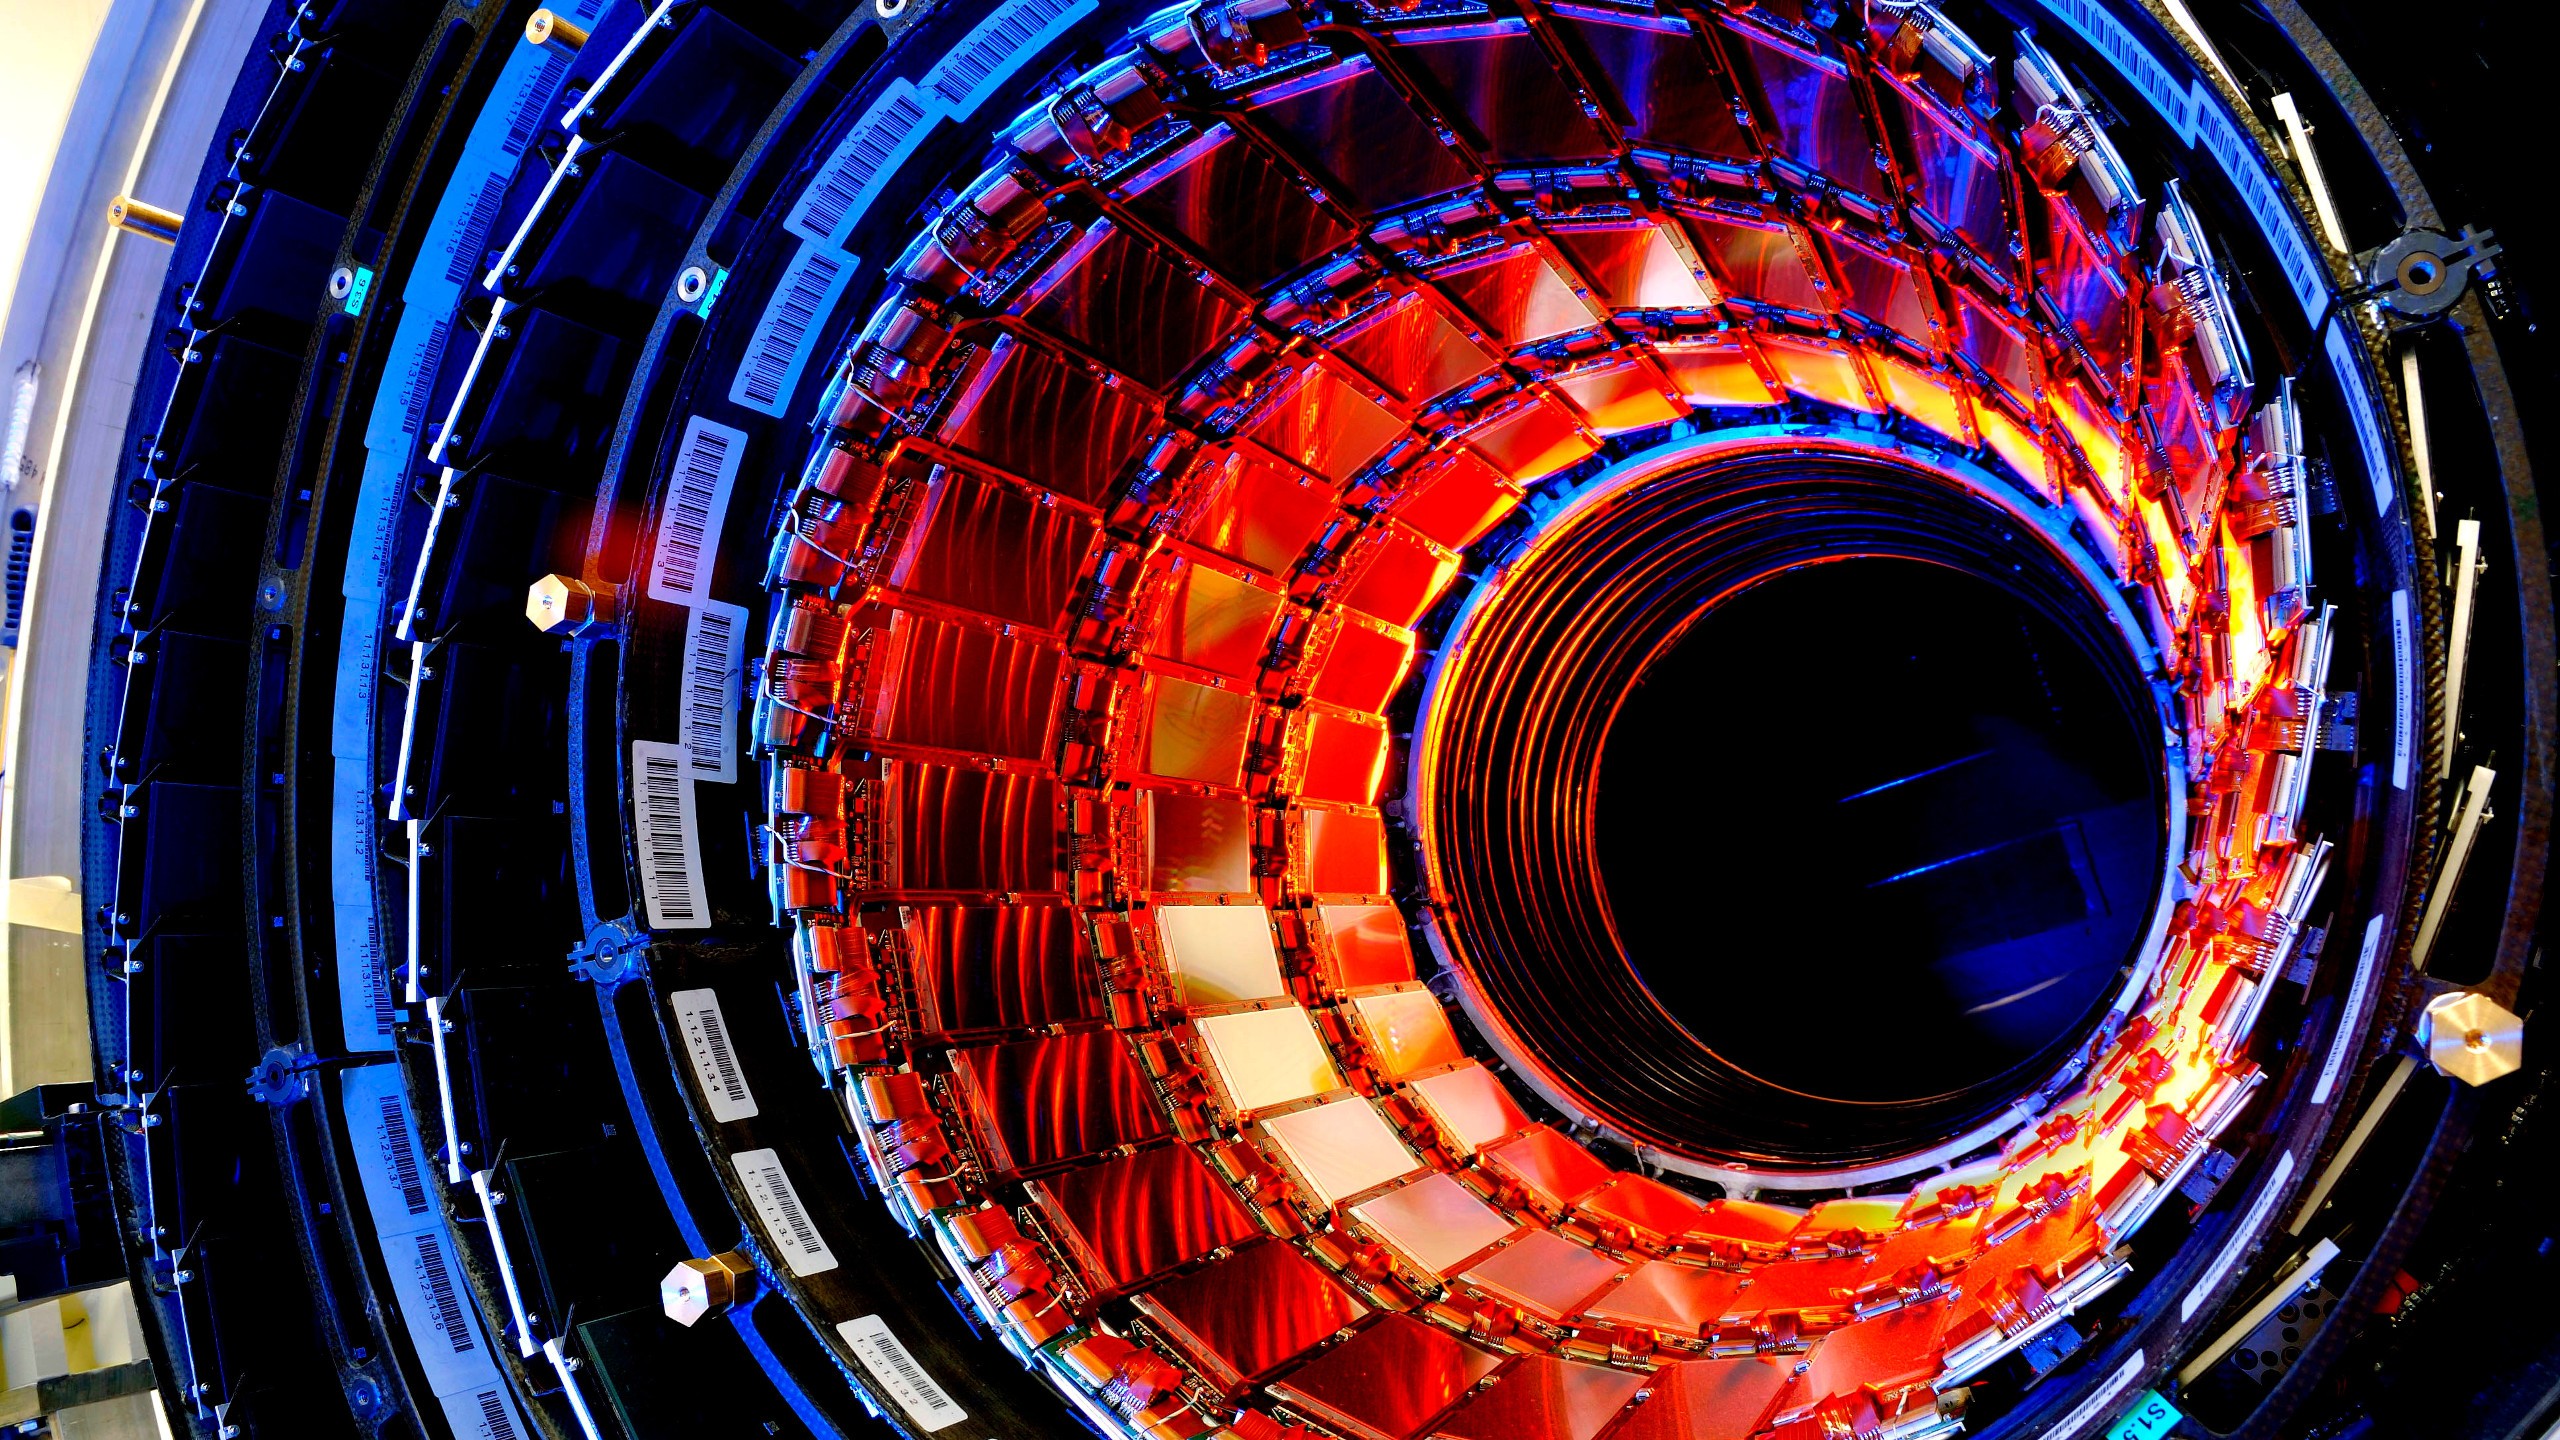 General 2560x1440 Large Hadron Collider technology science machine